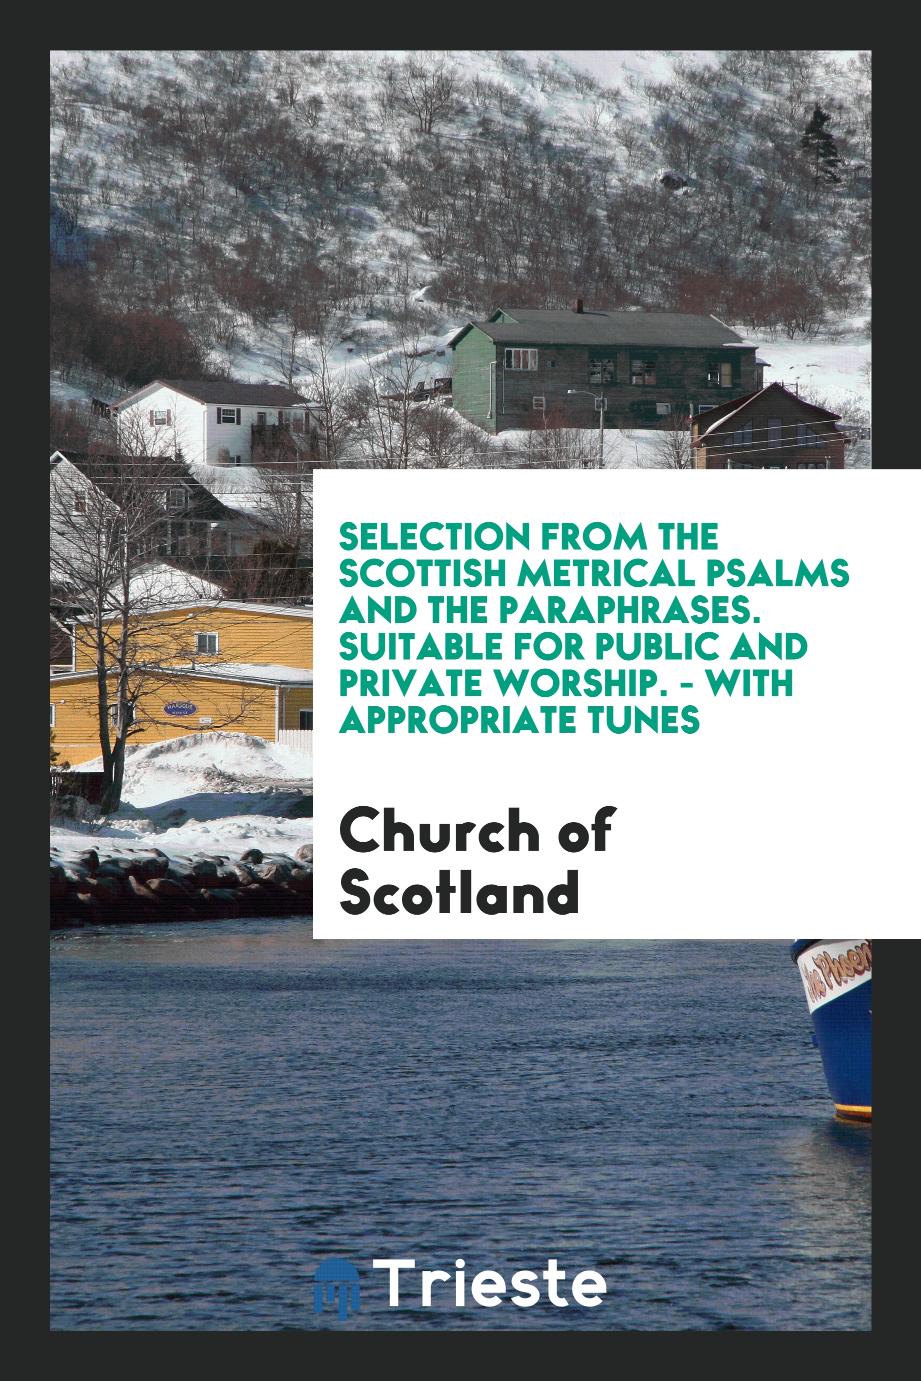 Selection from the Scottish Metrical Psalms and the Paraphrases. Suitable for Public and Private Worship. - with Appropriate Tunes